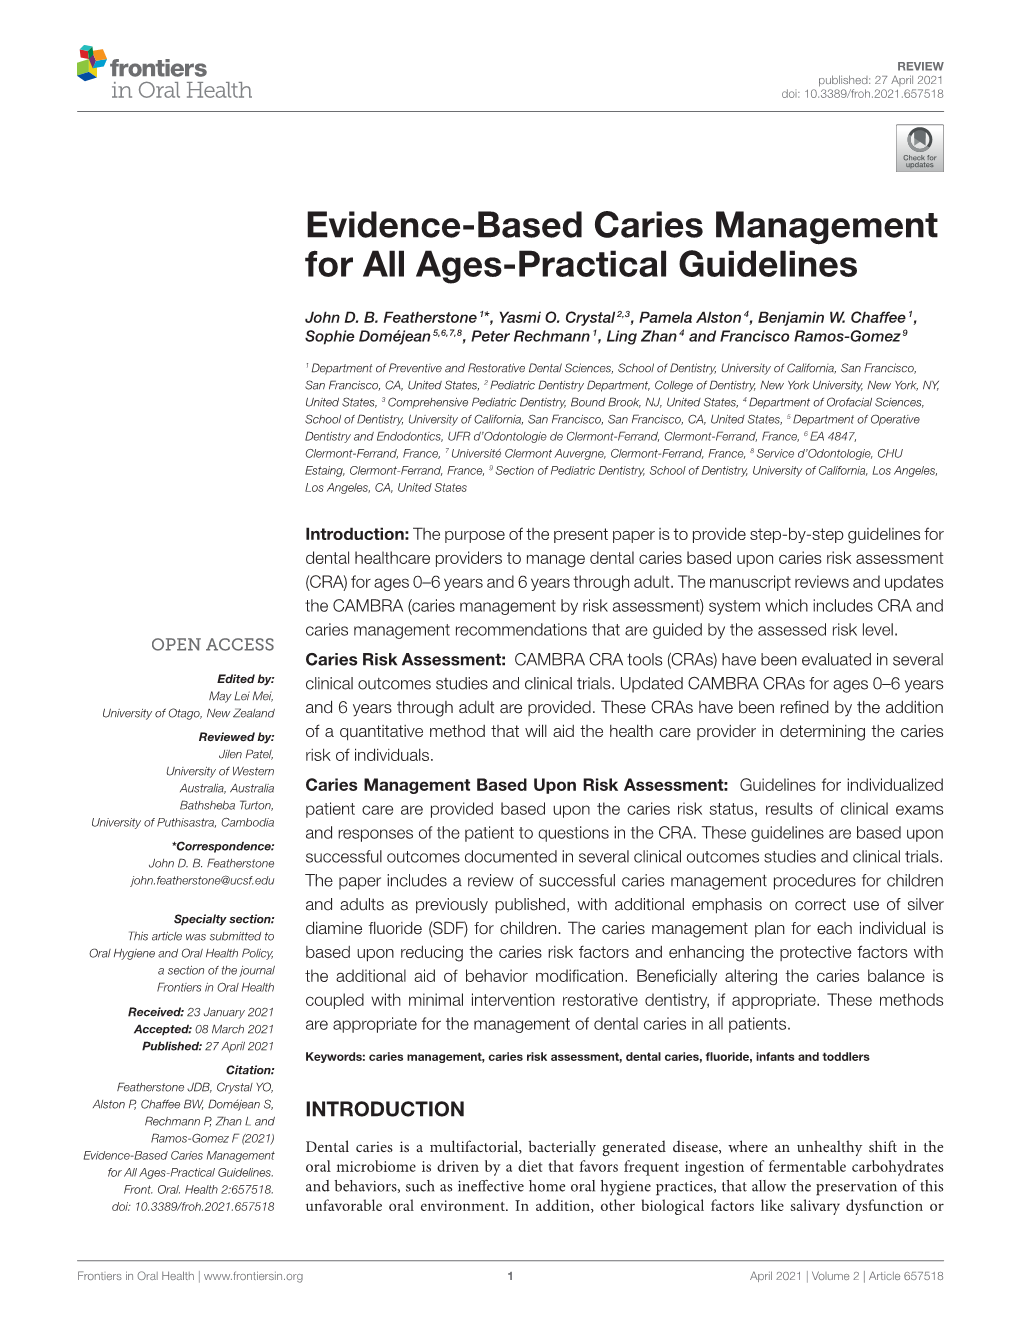 Evidence-Based Caries Management for All Ages-Practical Guidelines